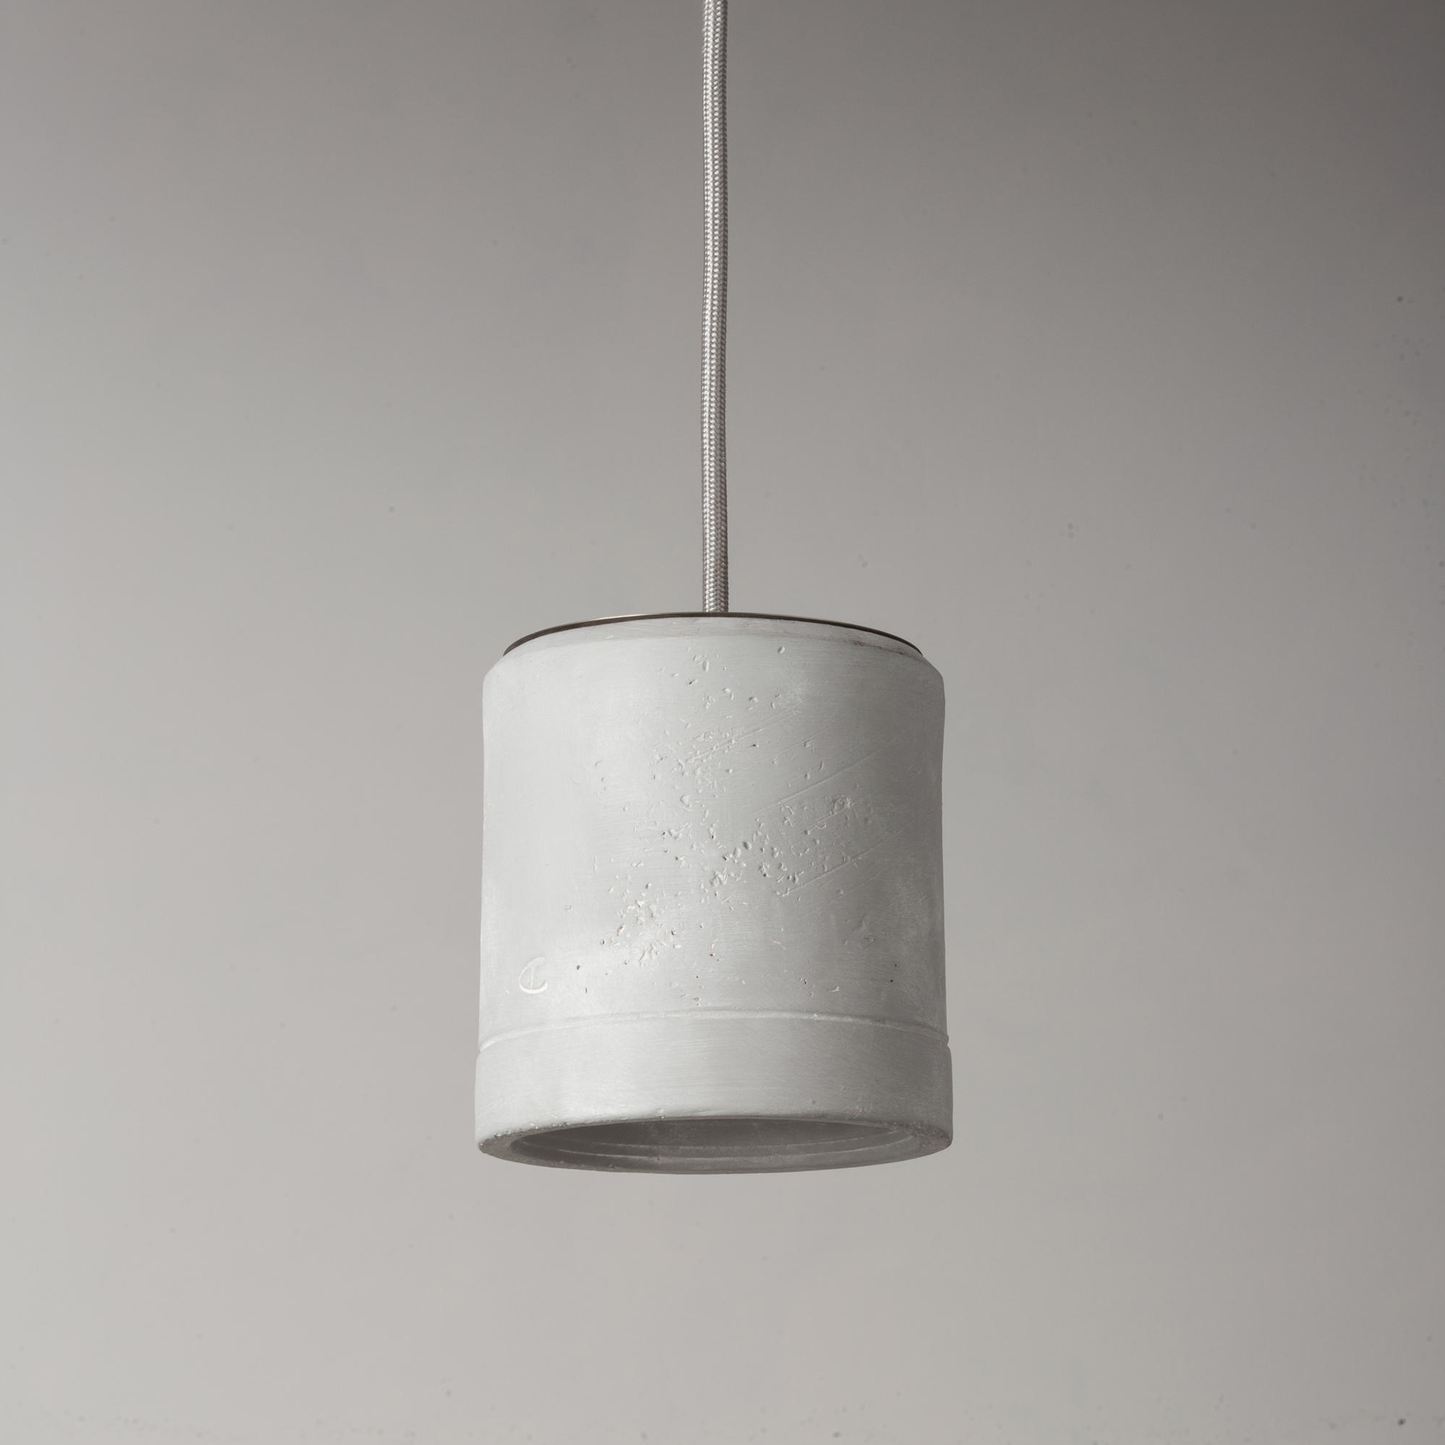 Carso 982S Pendant Light by Toscot